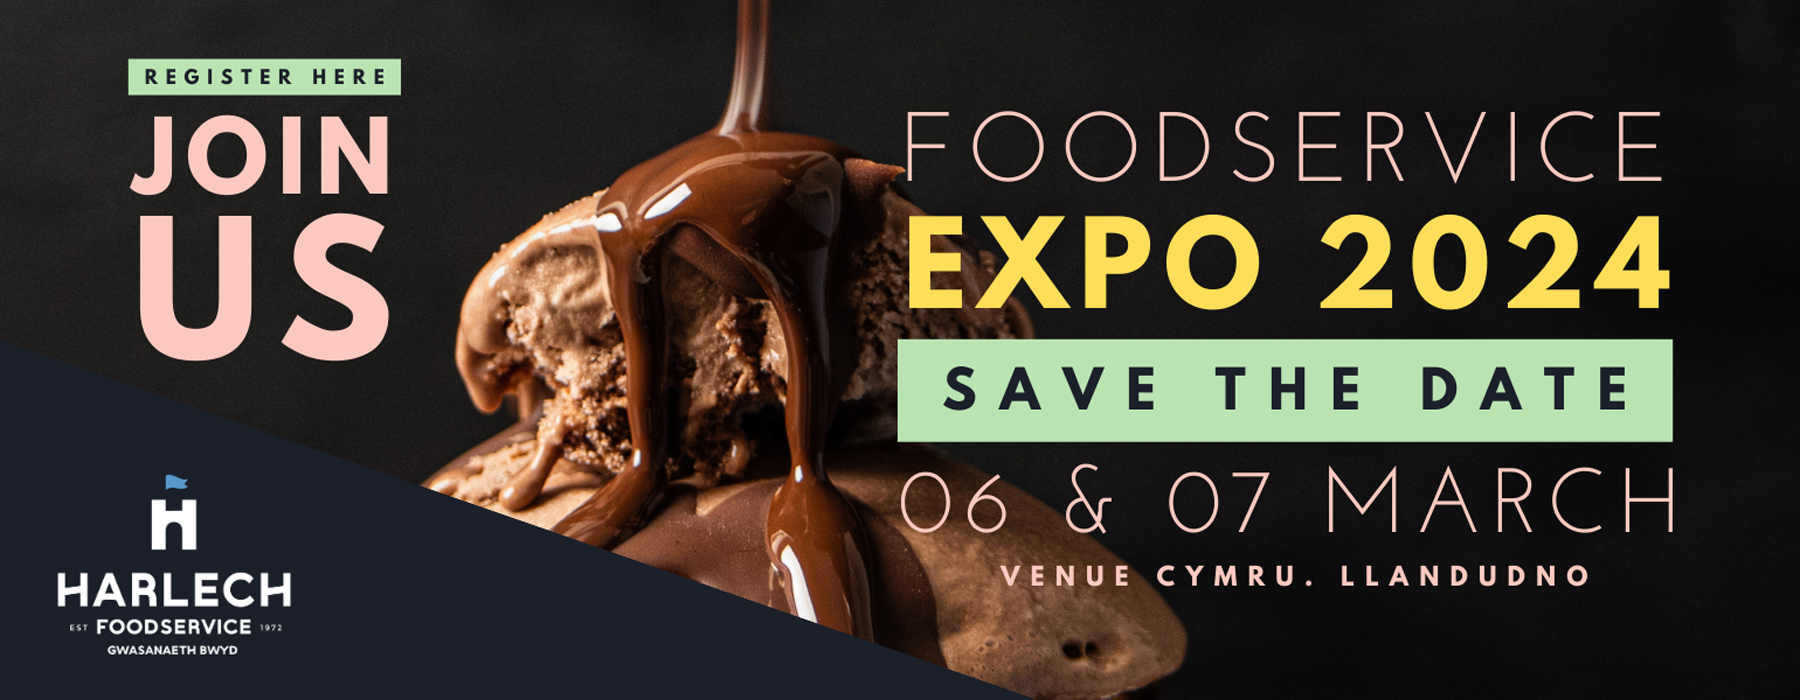 Harlech Foodservice EXPO 2024